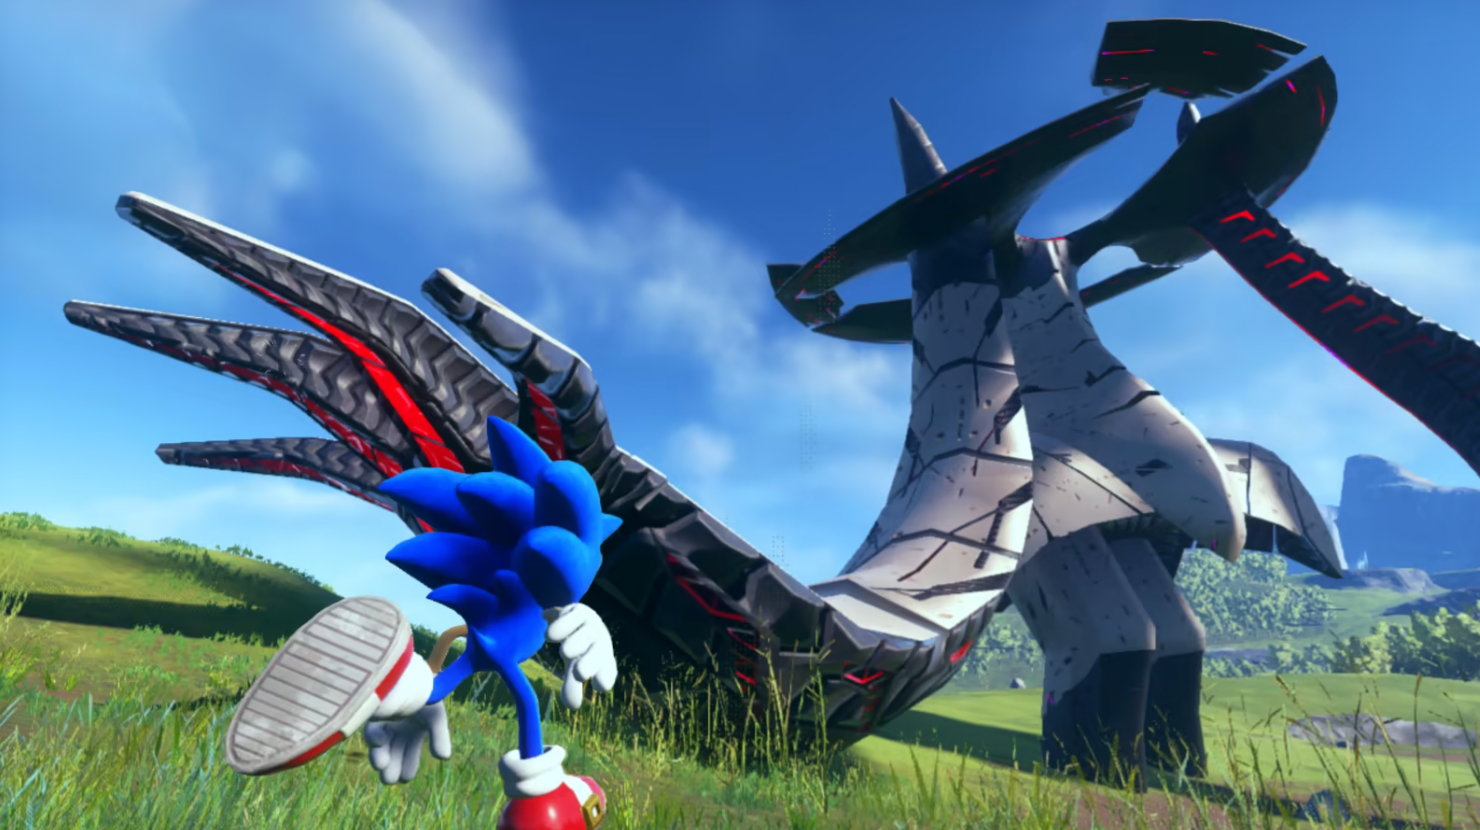 Sonic Frontiers Switch Demo Available Worldwide